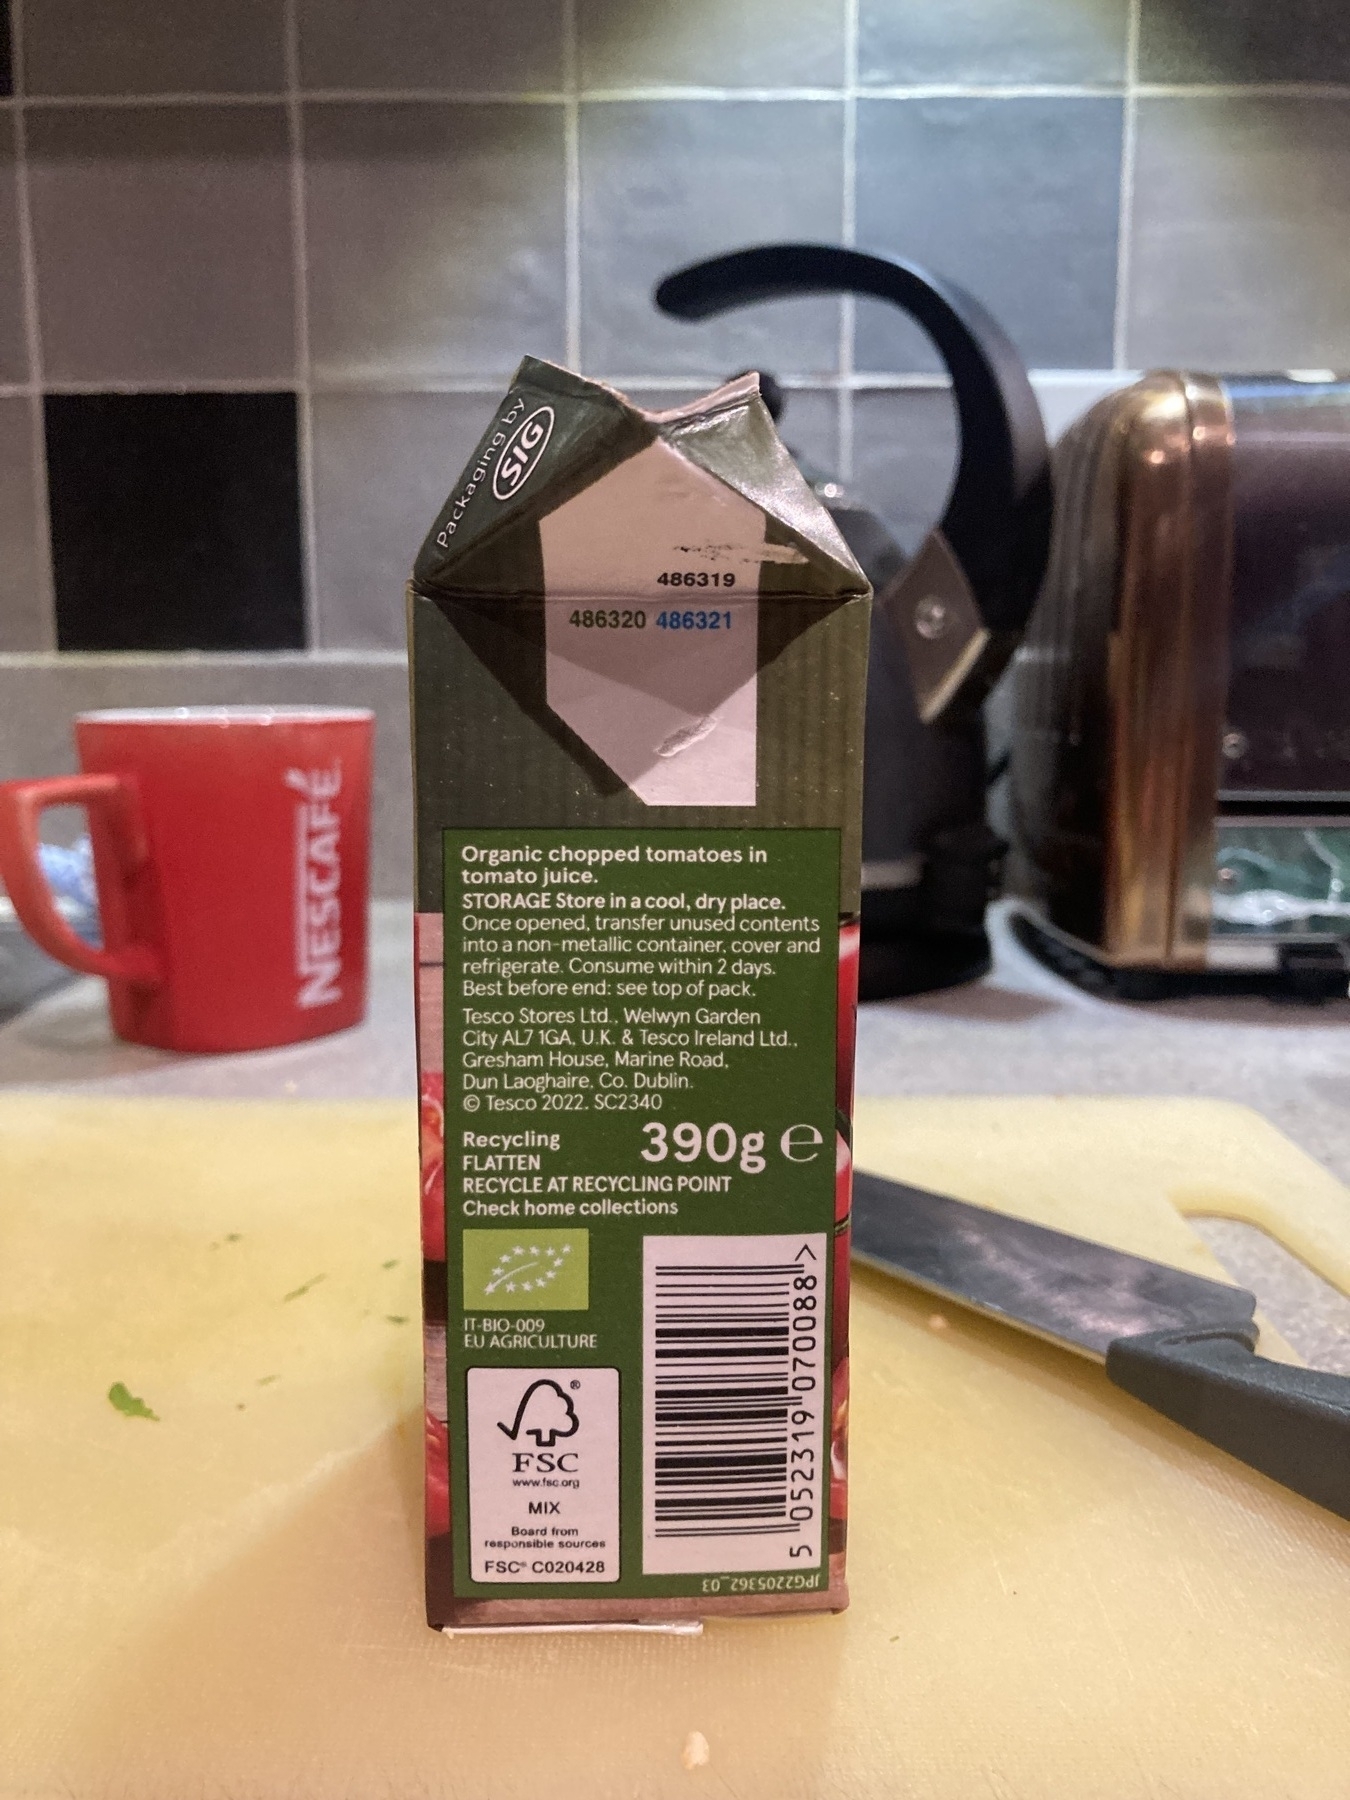 A close up of the label on a carton of Tesco's organic tomato slurry